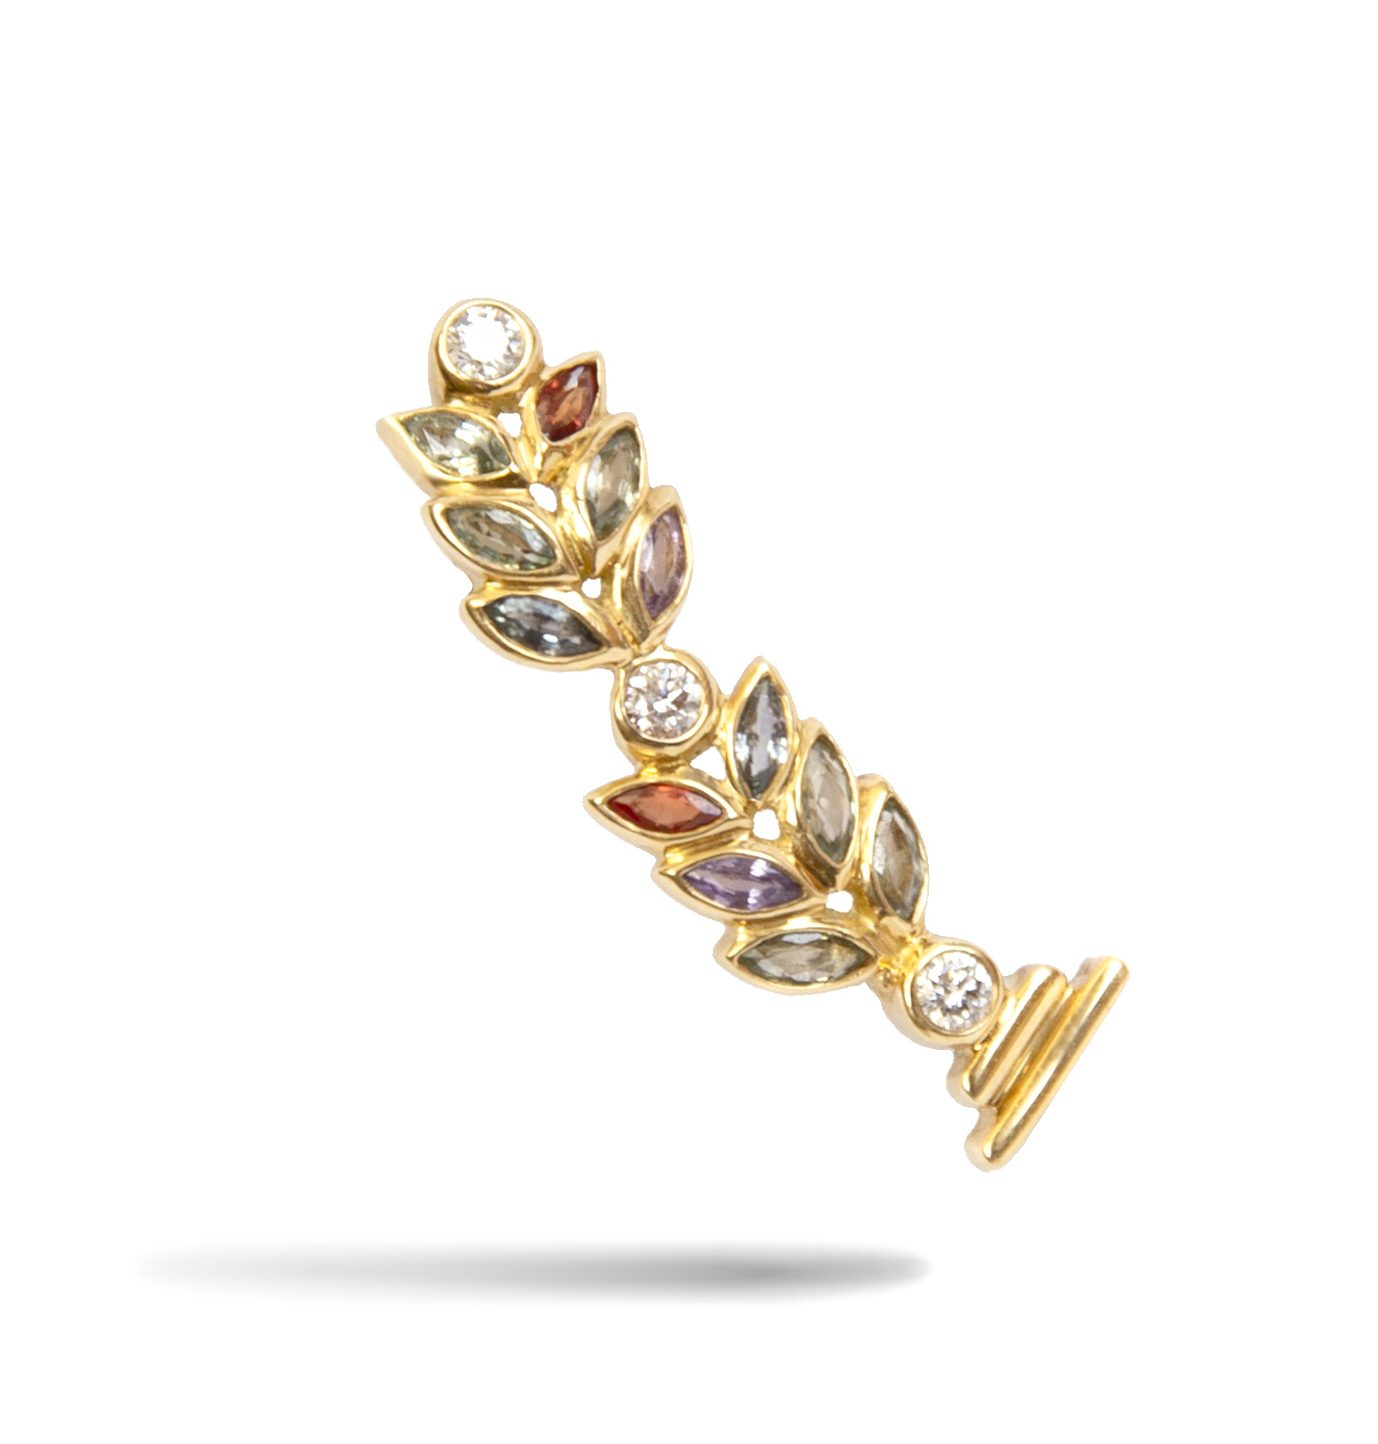 Bay Leaf Ear Climber with Diamonds and Sapphires